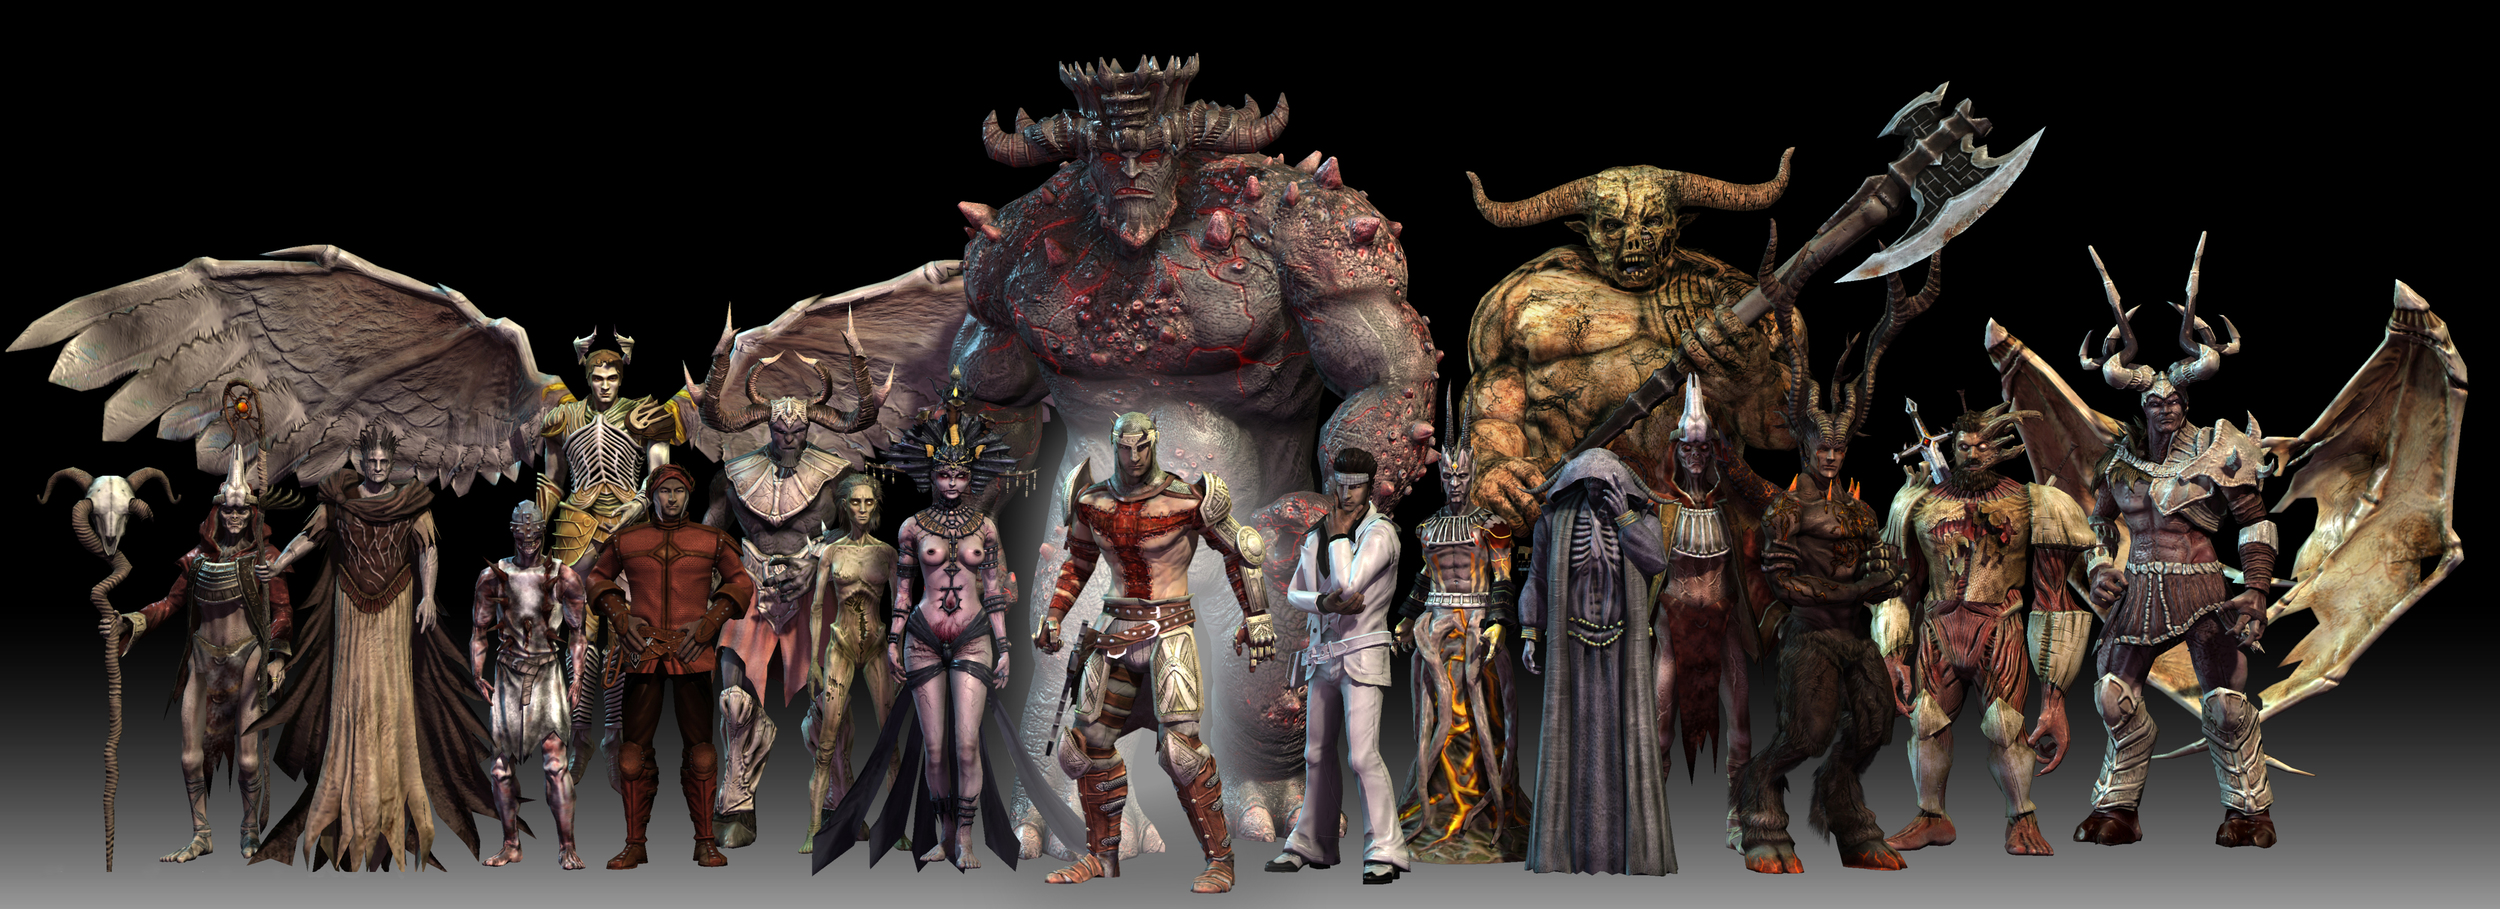 Dante's Inferno Character Lineup.